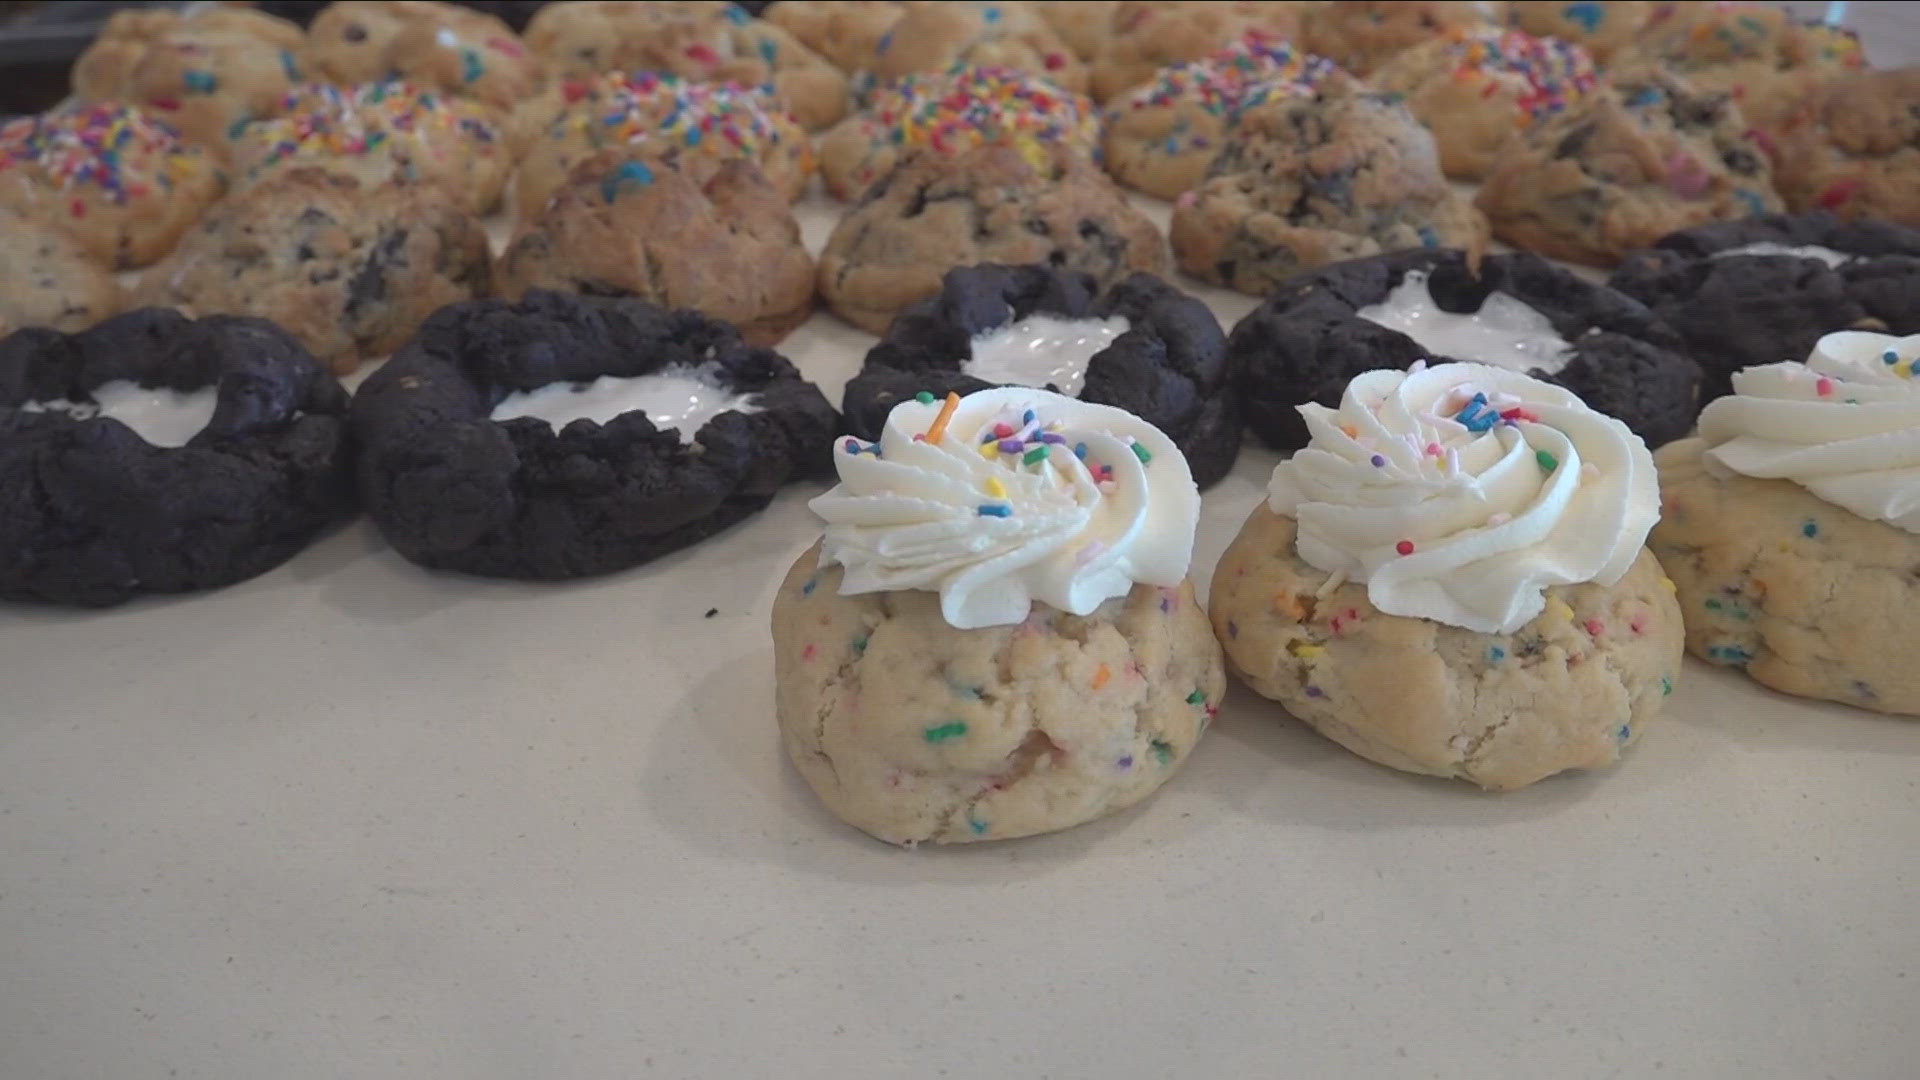 Half-Baked Cookies coming to Elmwood Village for 3rd location